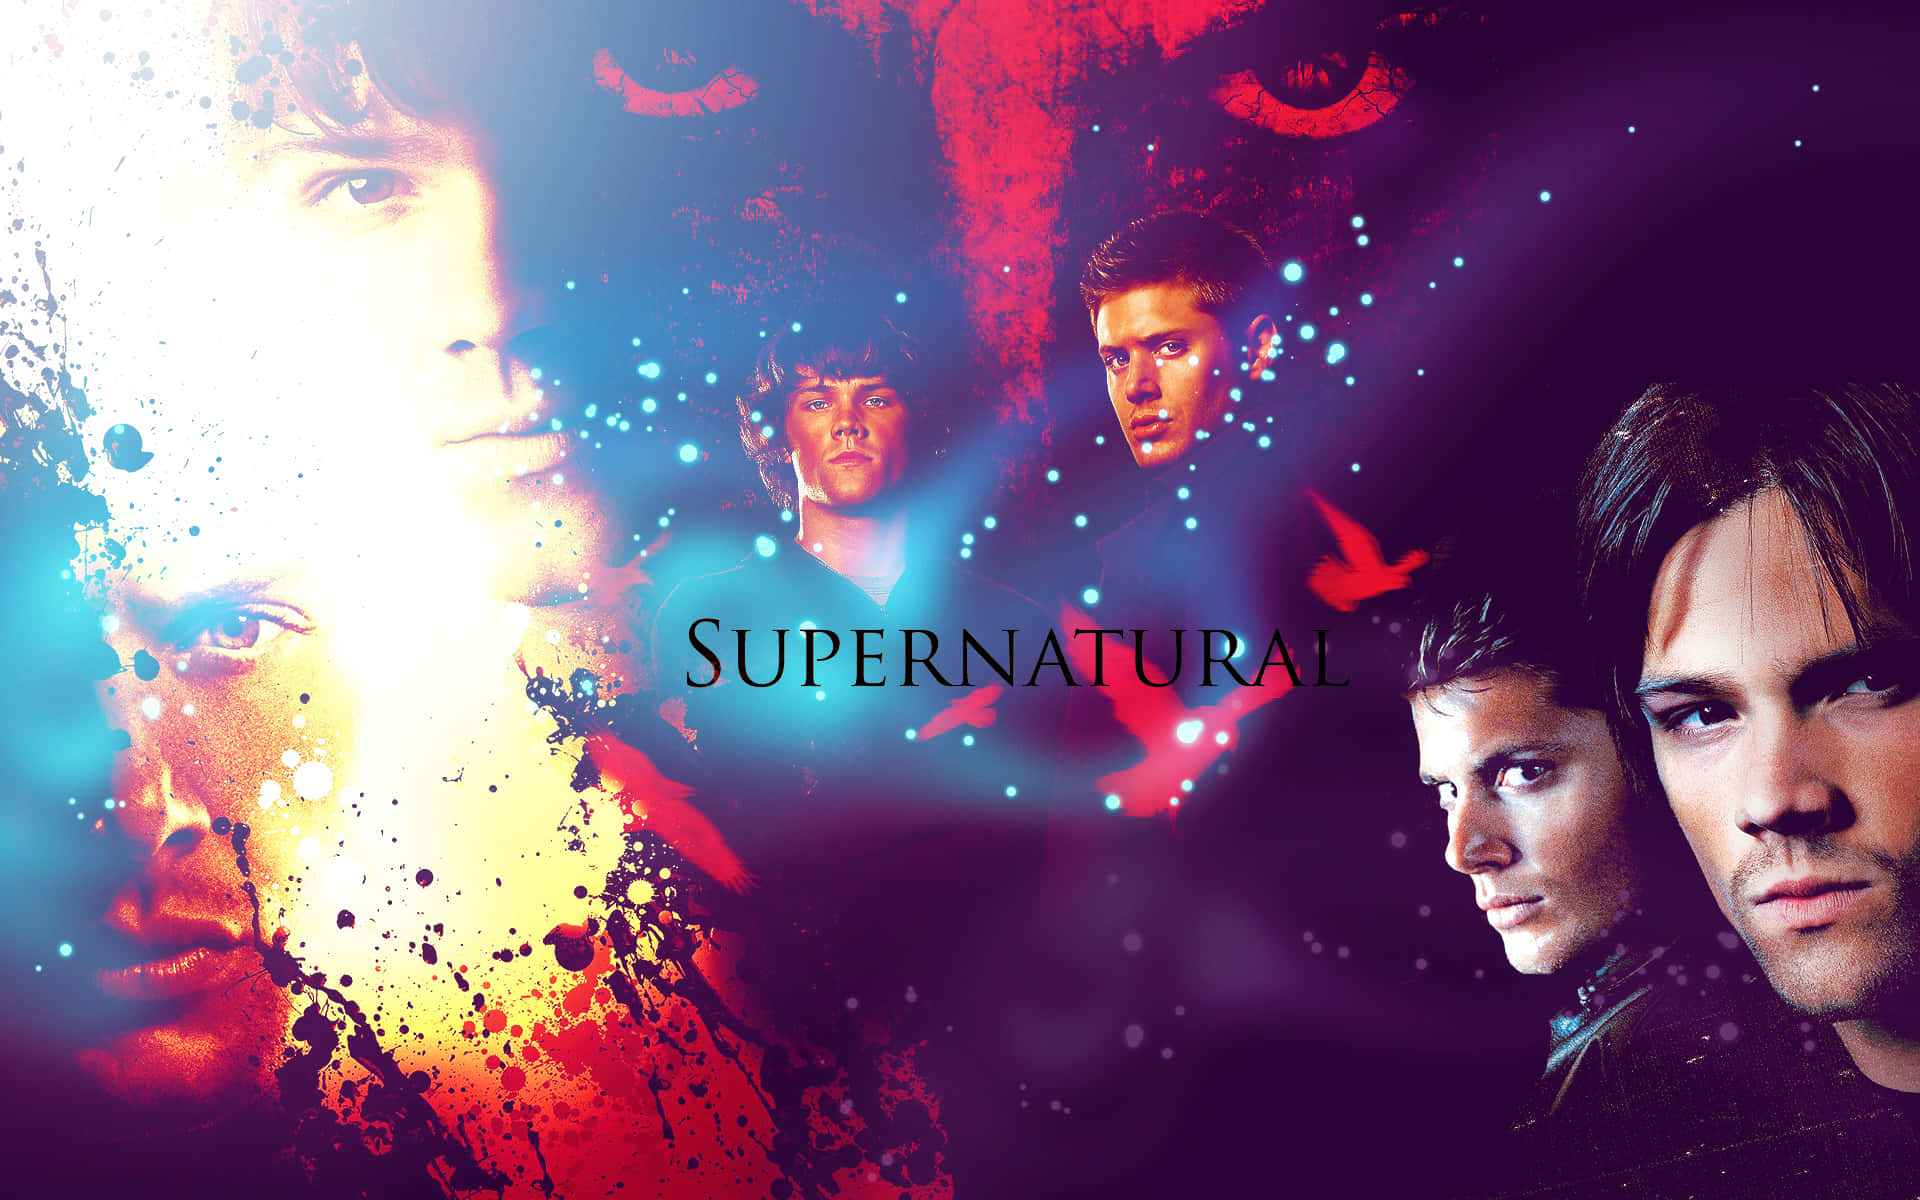 Revealing the mystery in supernatural art Wallpaper